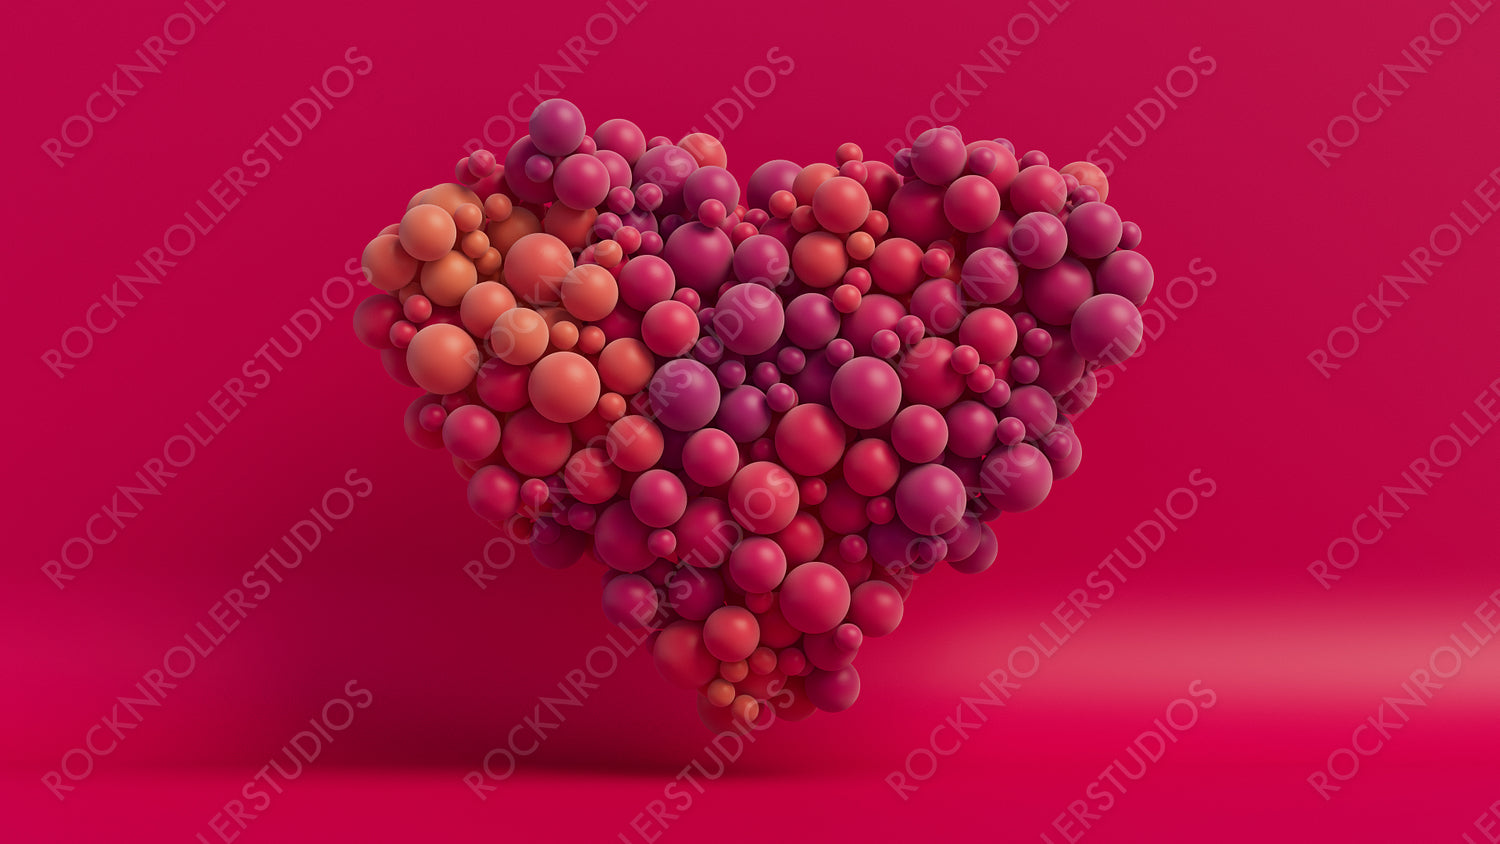 Multicolored Balloon Love Heart. Pink, Orange and Red Balloons arranged in a heart shape. 3D Render